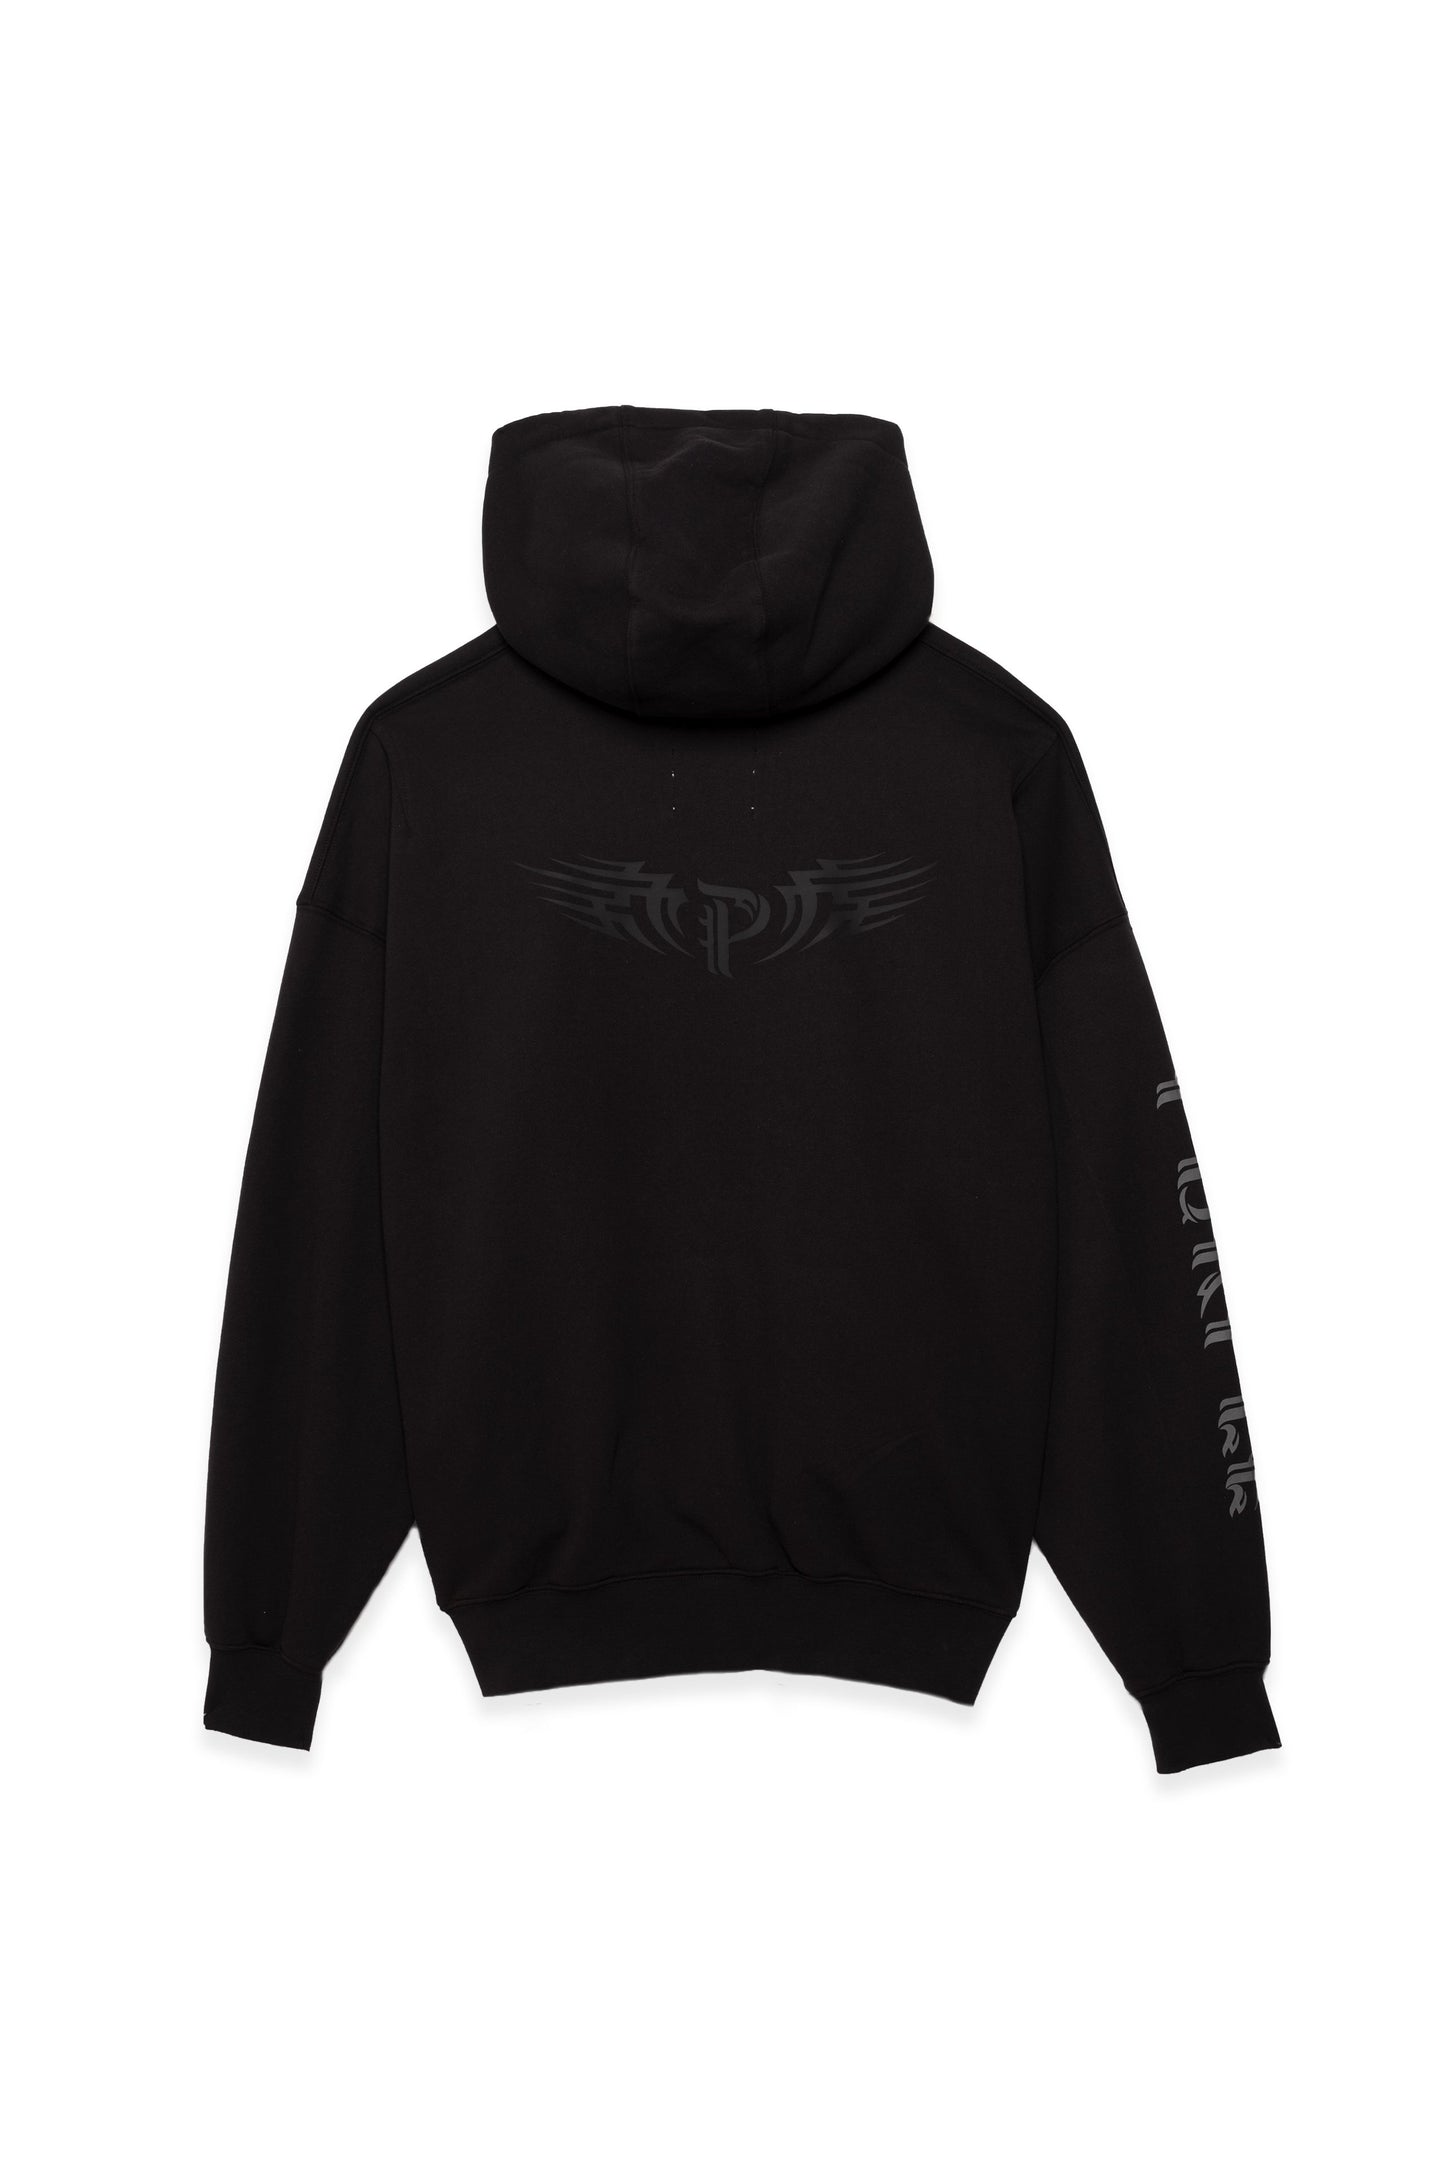 PURPLE BRAND - Relaxed Fit Oversized Hoodie Sweatshirt - Style No. P401 - Wings - Back